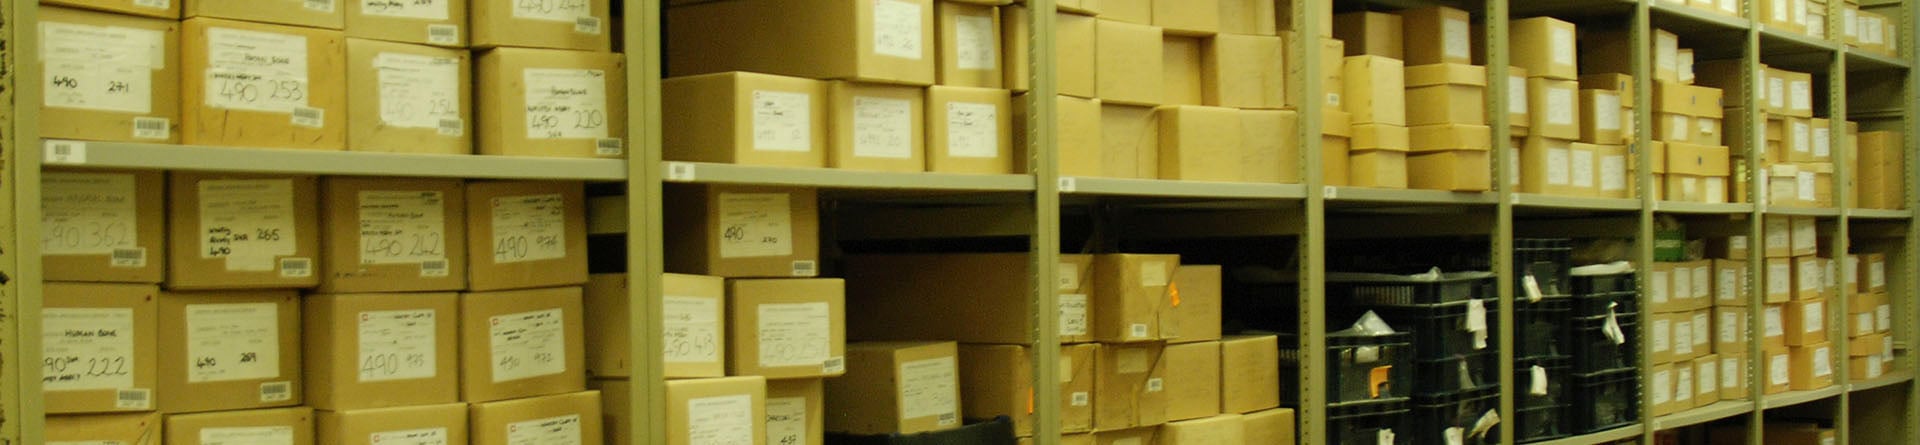 Labelled archive boxes on shelves within an archives store